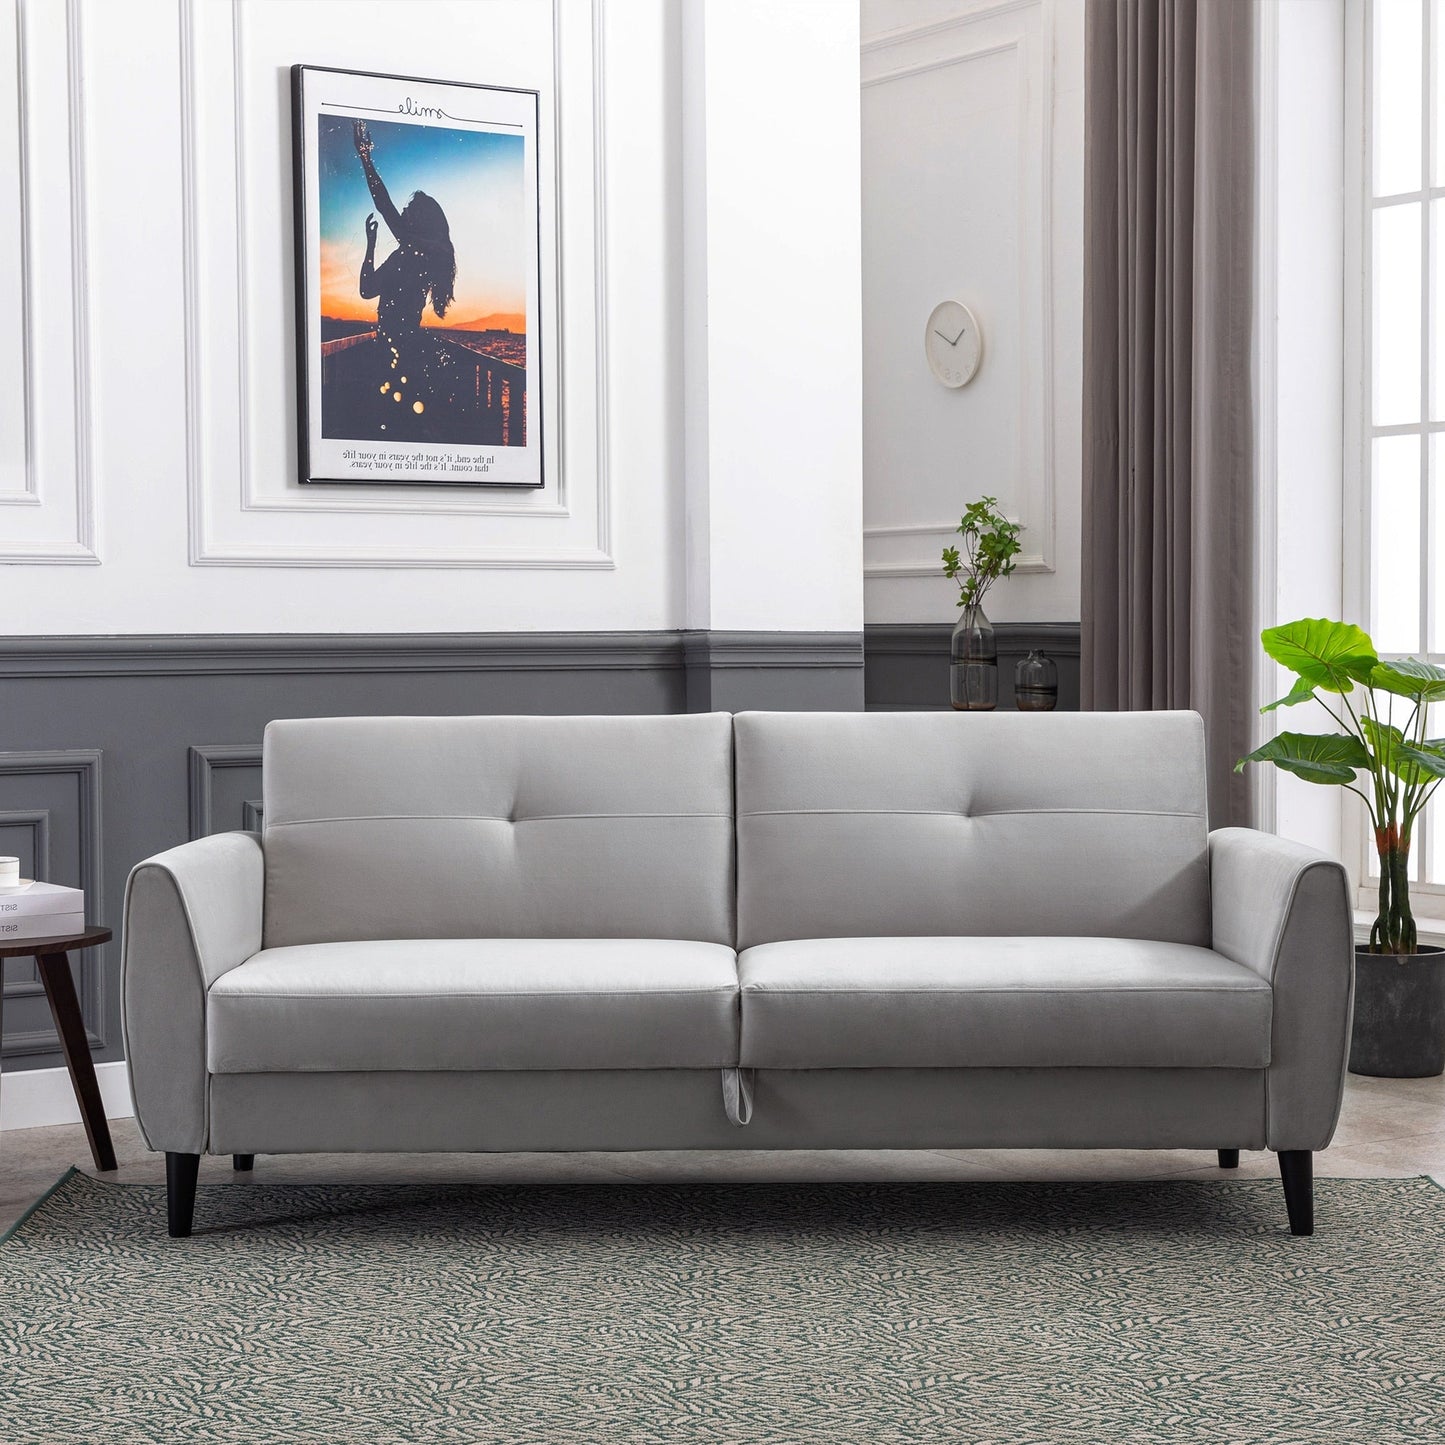 Modern Armchair Sofa Bed In Grey Color